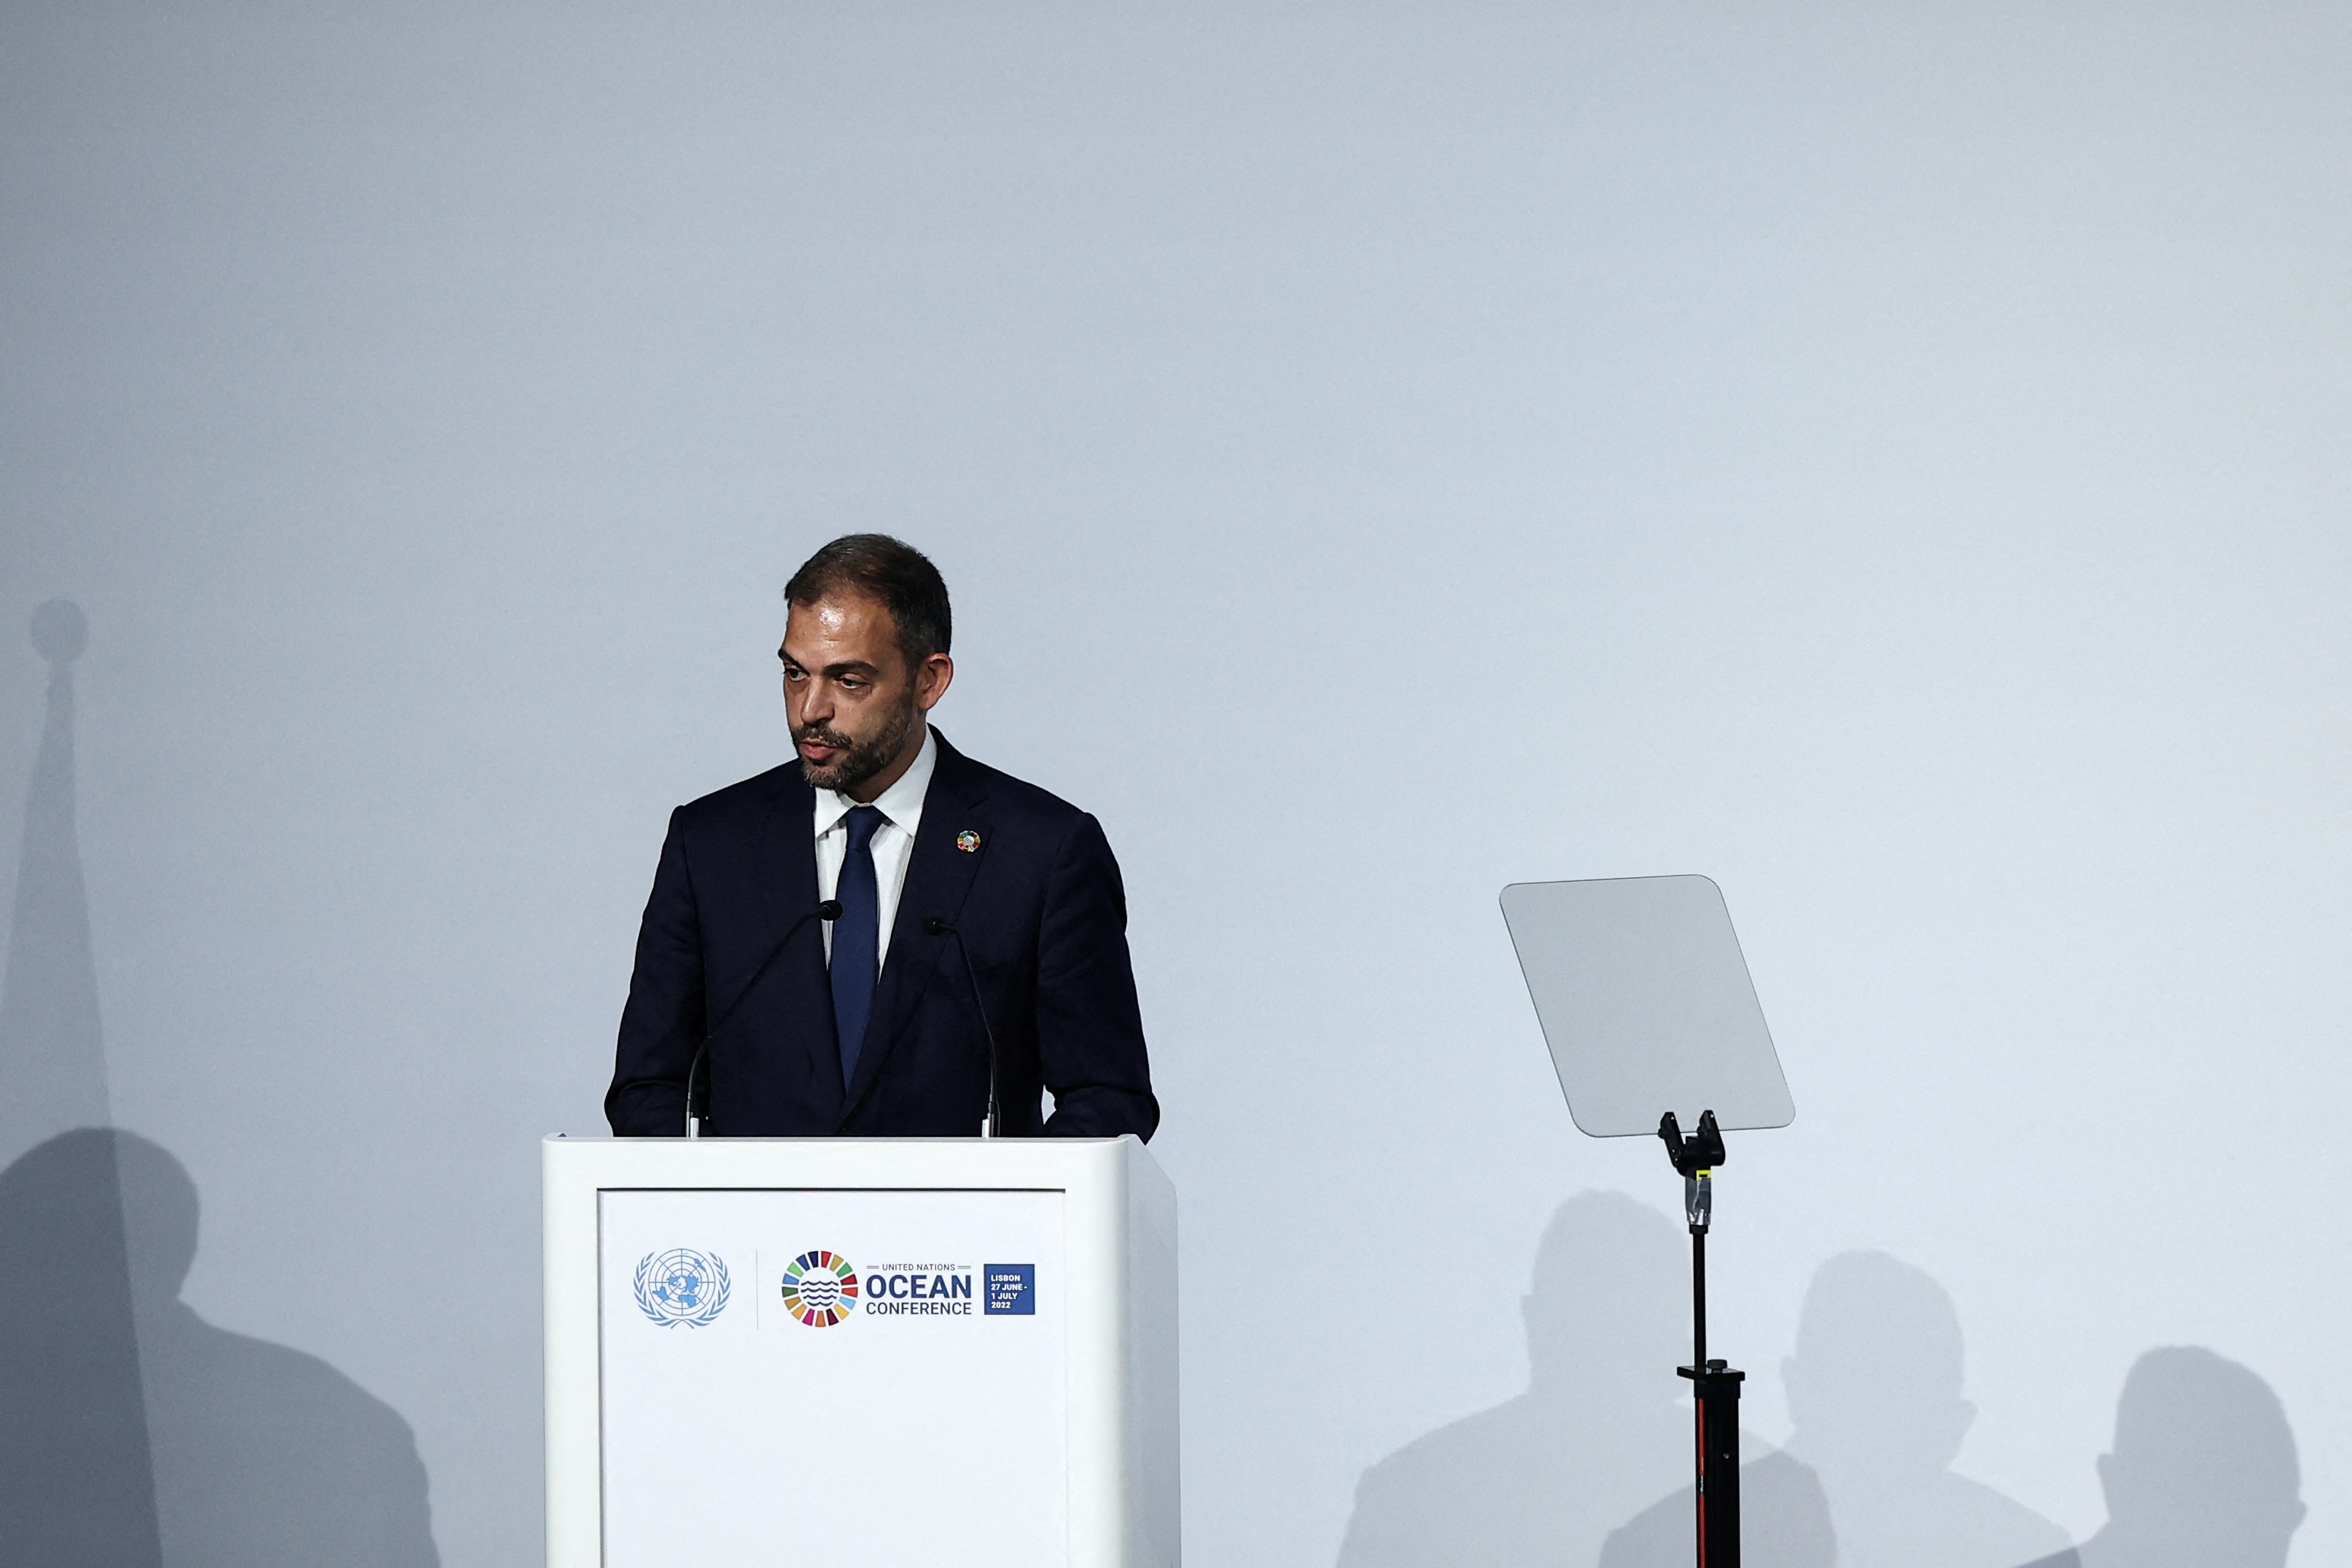 Portugal's Minister of Environment and Climate Action, Duarte Cordeiro speaks during the closing of 2022 UN Ocean Conference in Lisbon, Portugal, July 1, 2022. REUTERS/Rodrigo/File Photo